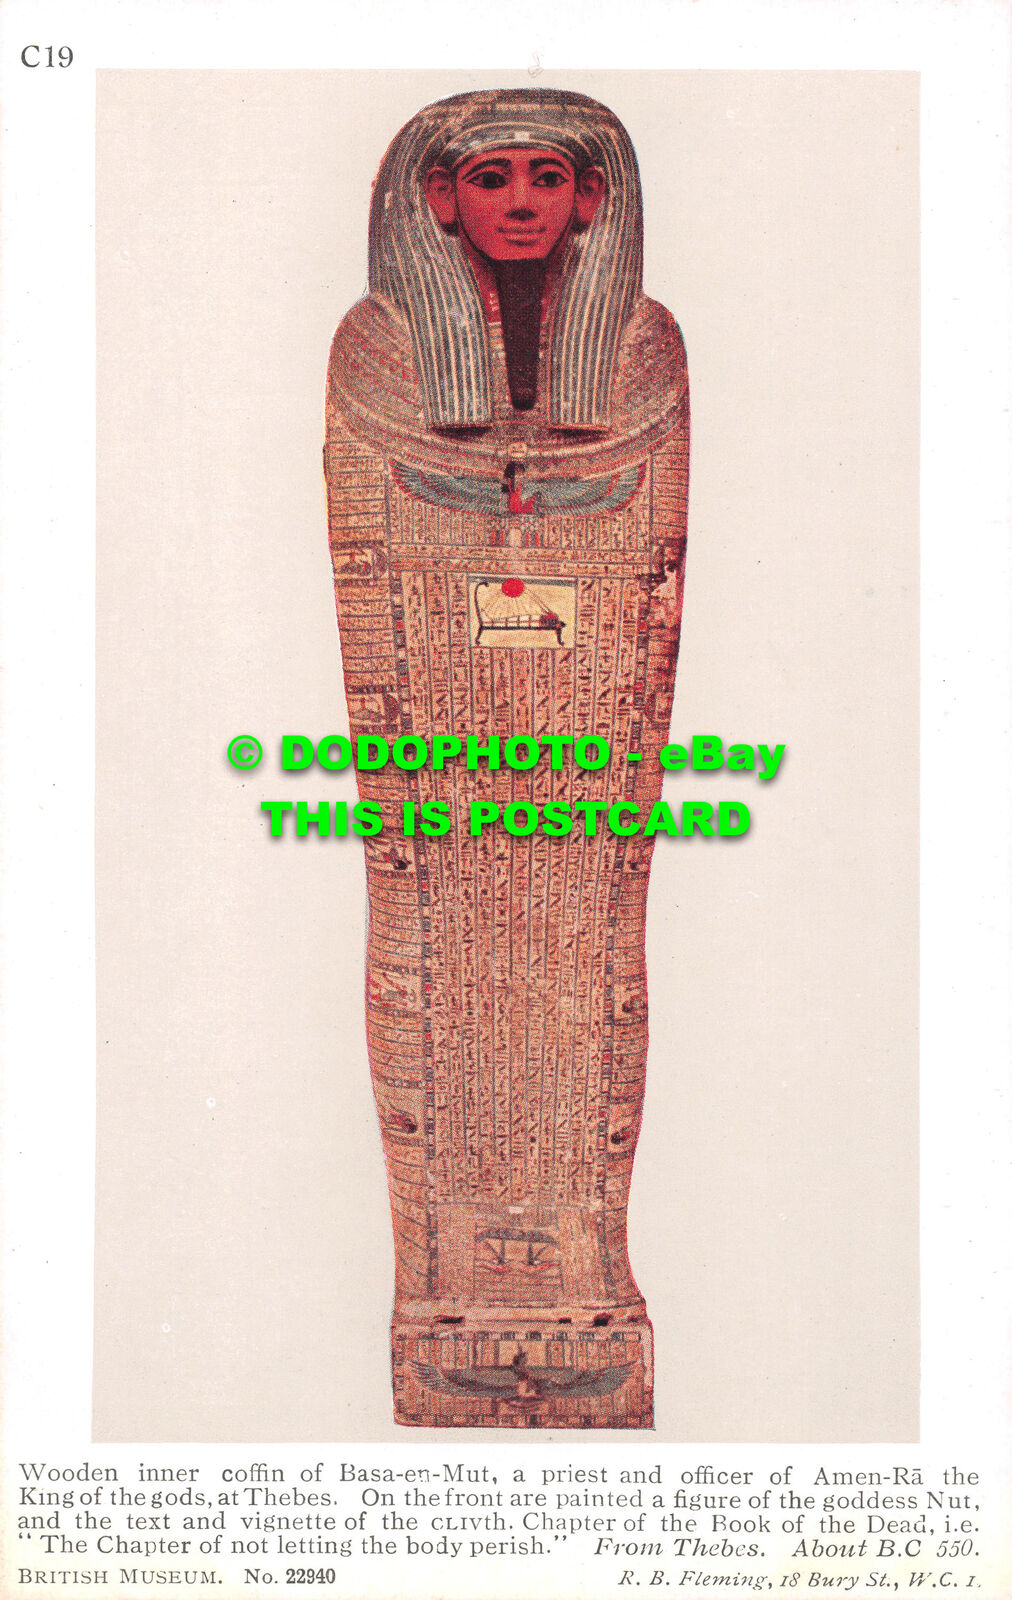 R487891 C19. Wooden inner coffin of Basa en Mut a priest and officer of Amen Ra